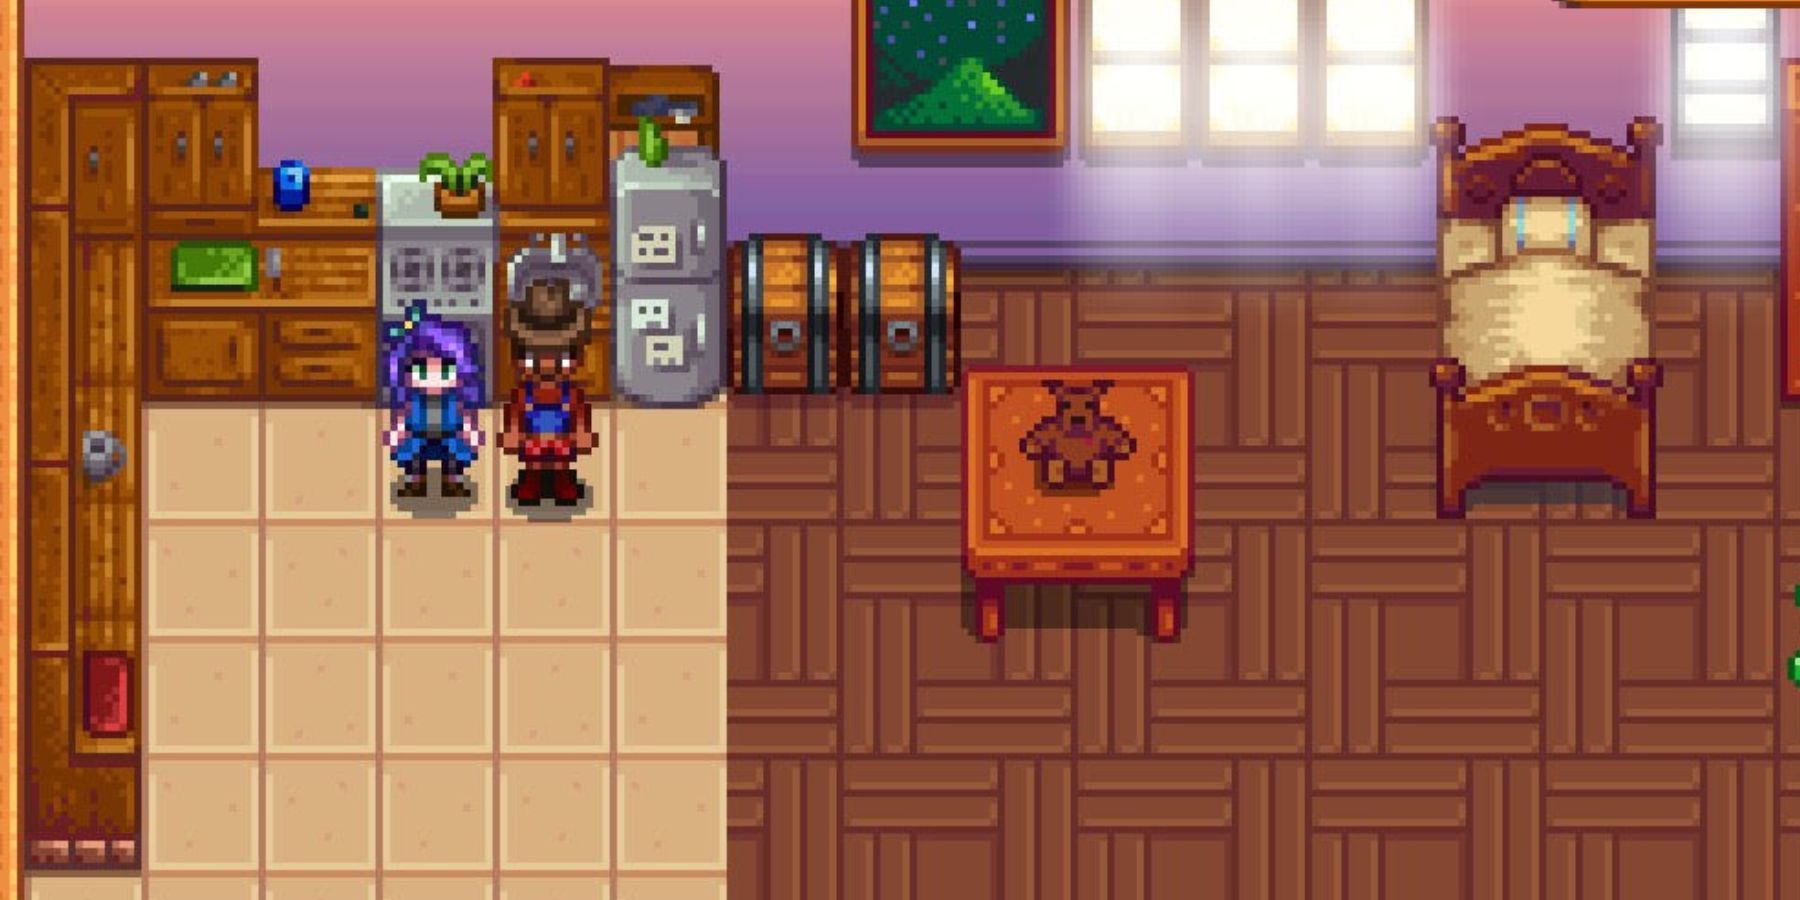  A character standing with their wife, Abigail, in Stardew Valley.